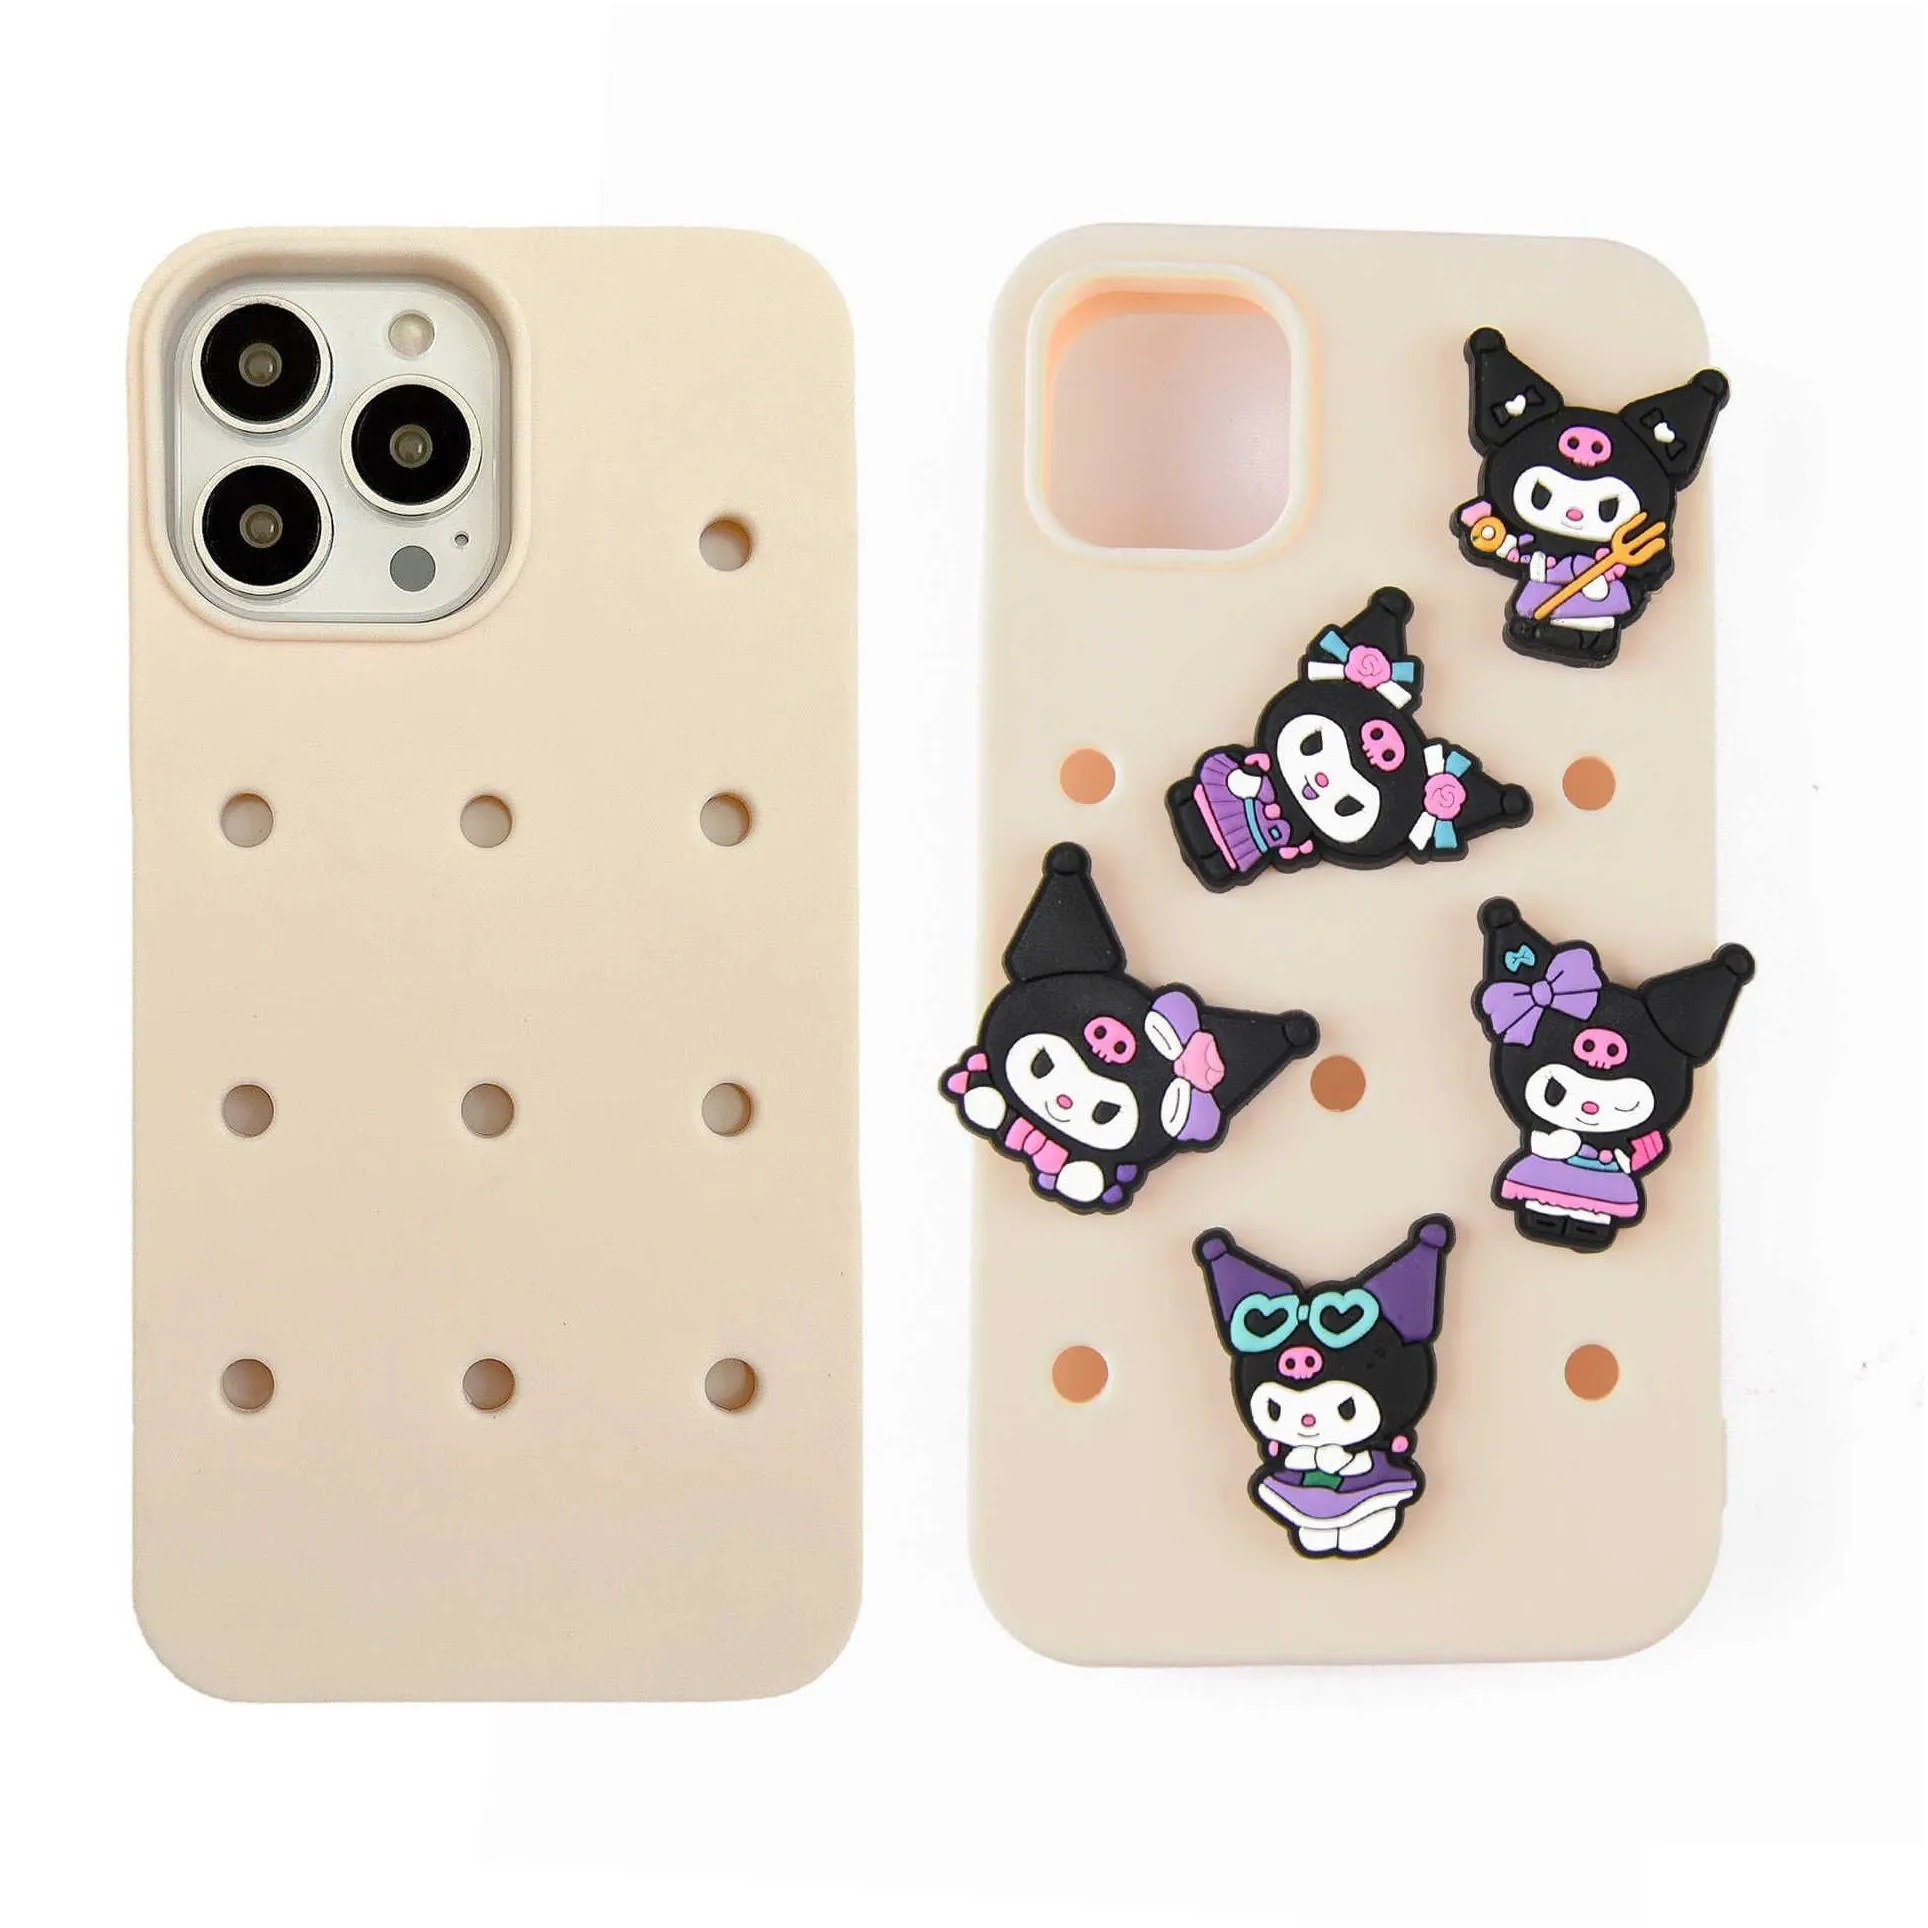 Shoe Parts Accessories hot selling in stock multi color silicone mobile phone cases diy charms phone case